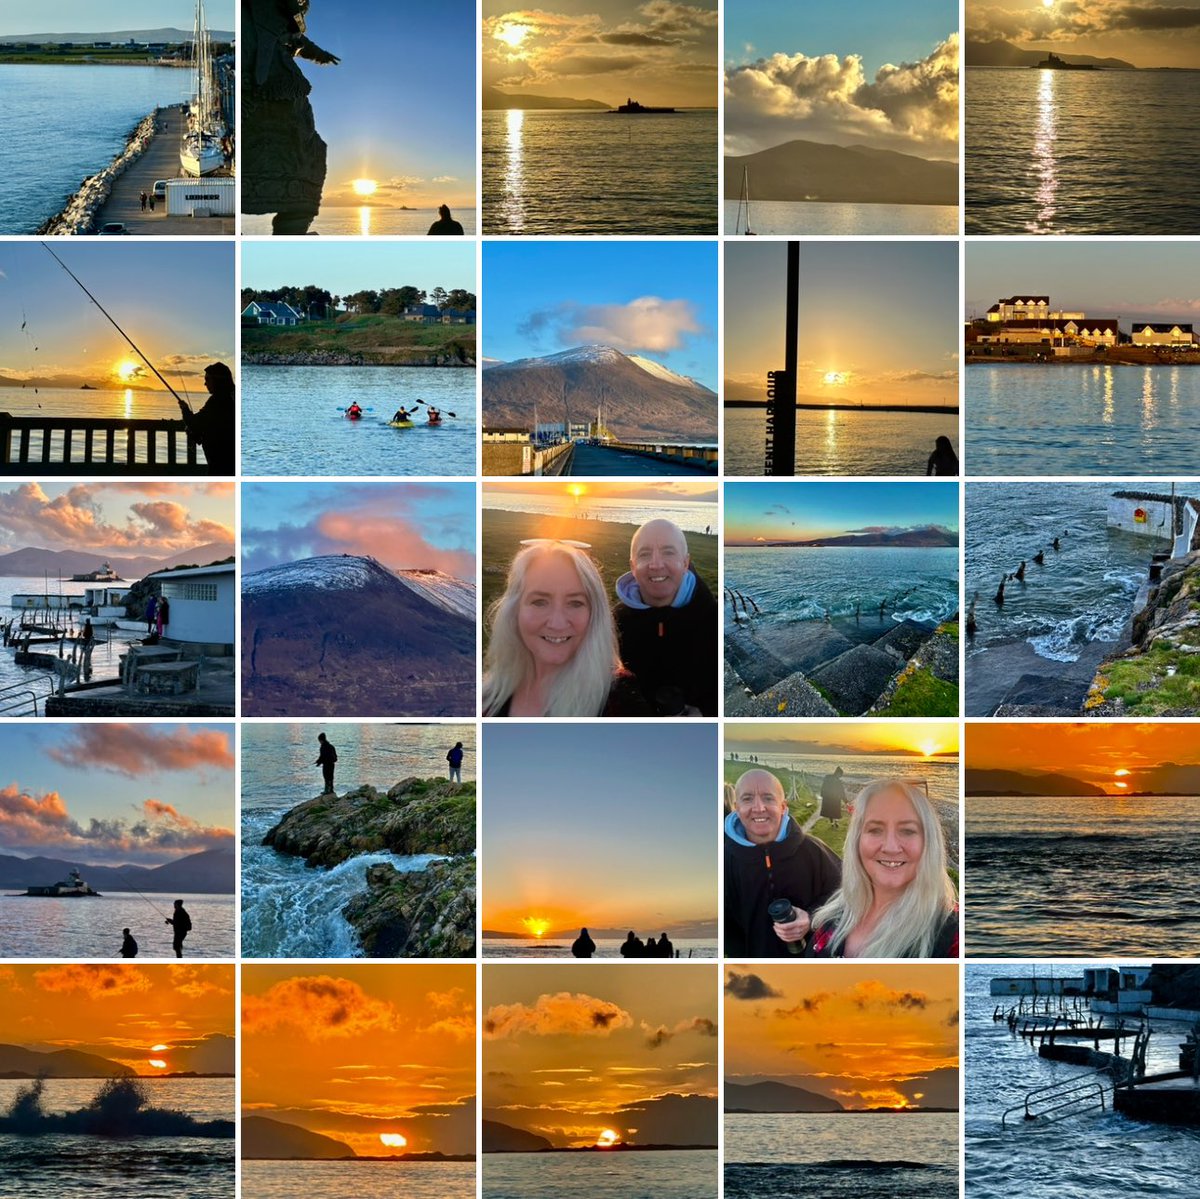 Photo collage of #Fenit going through #bluesky stage, warm #sunshine no wind, early yellow #sunset ending with first orange sunset of the year #Tralee #noplacelikehome #lovetralee #wildatlanticway